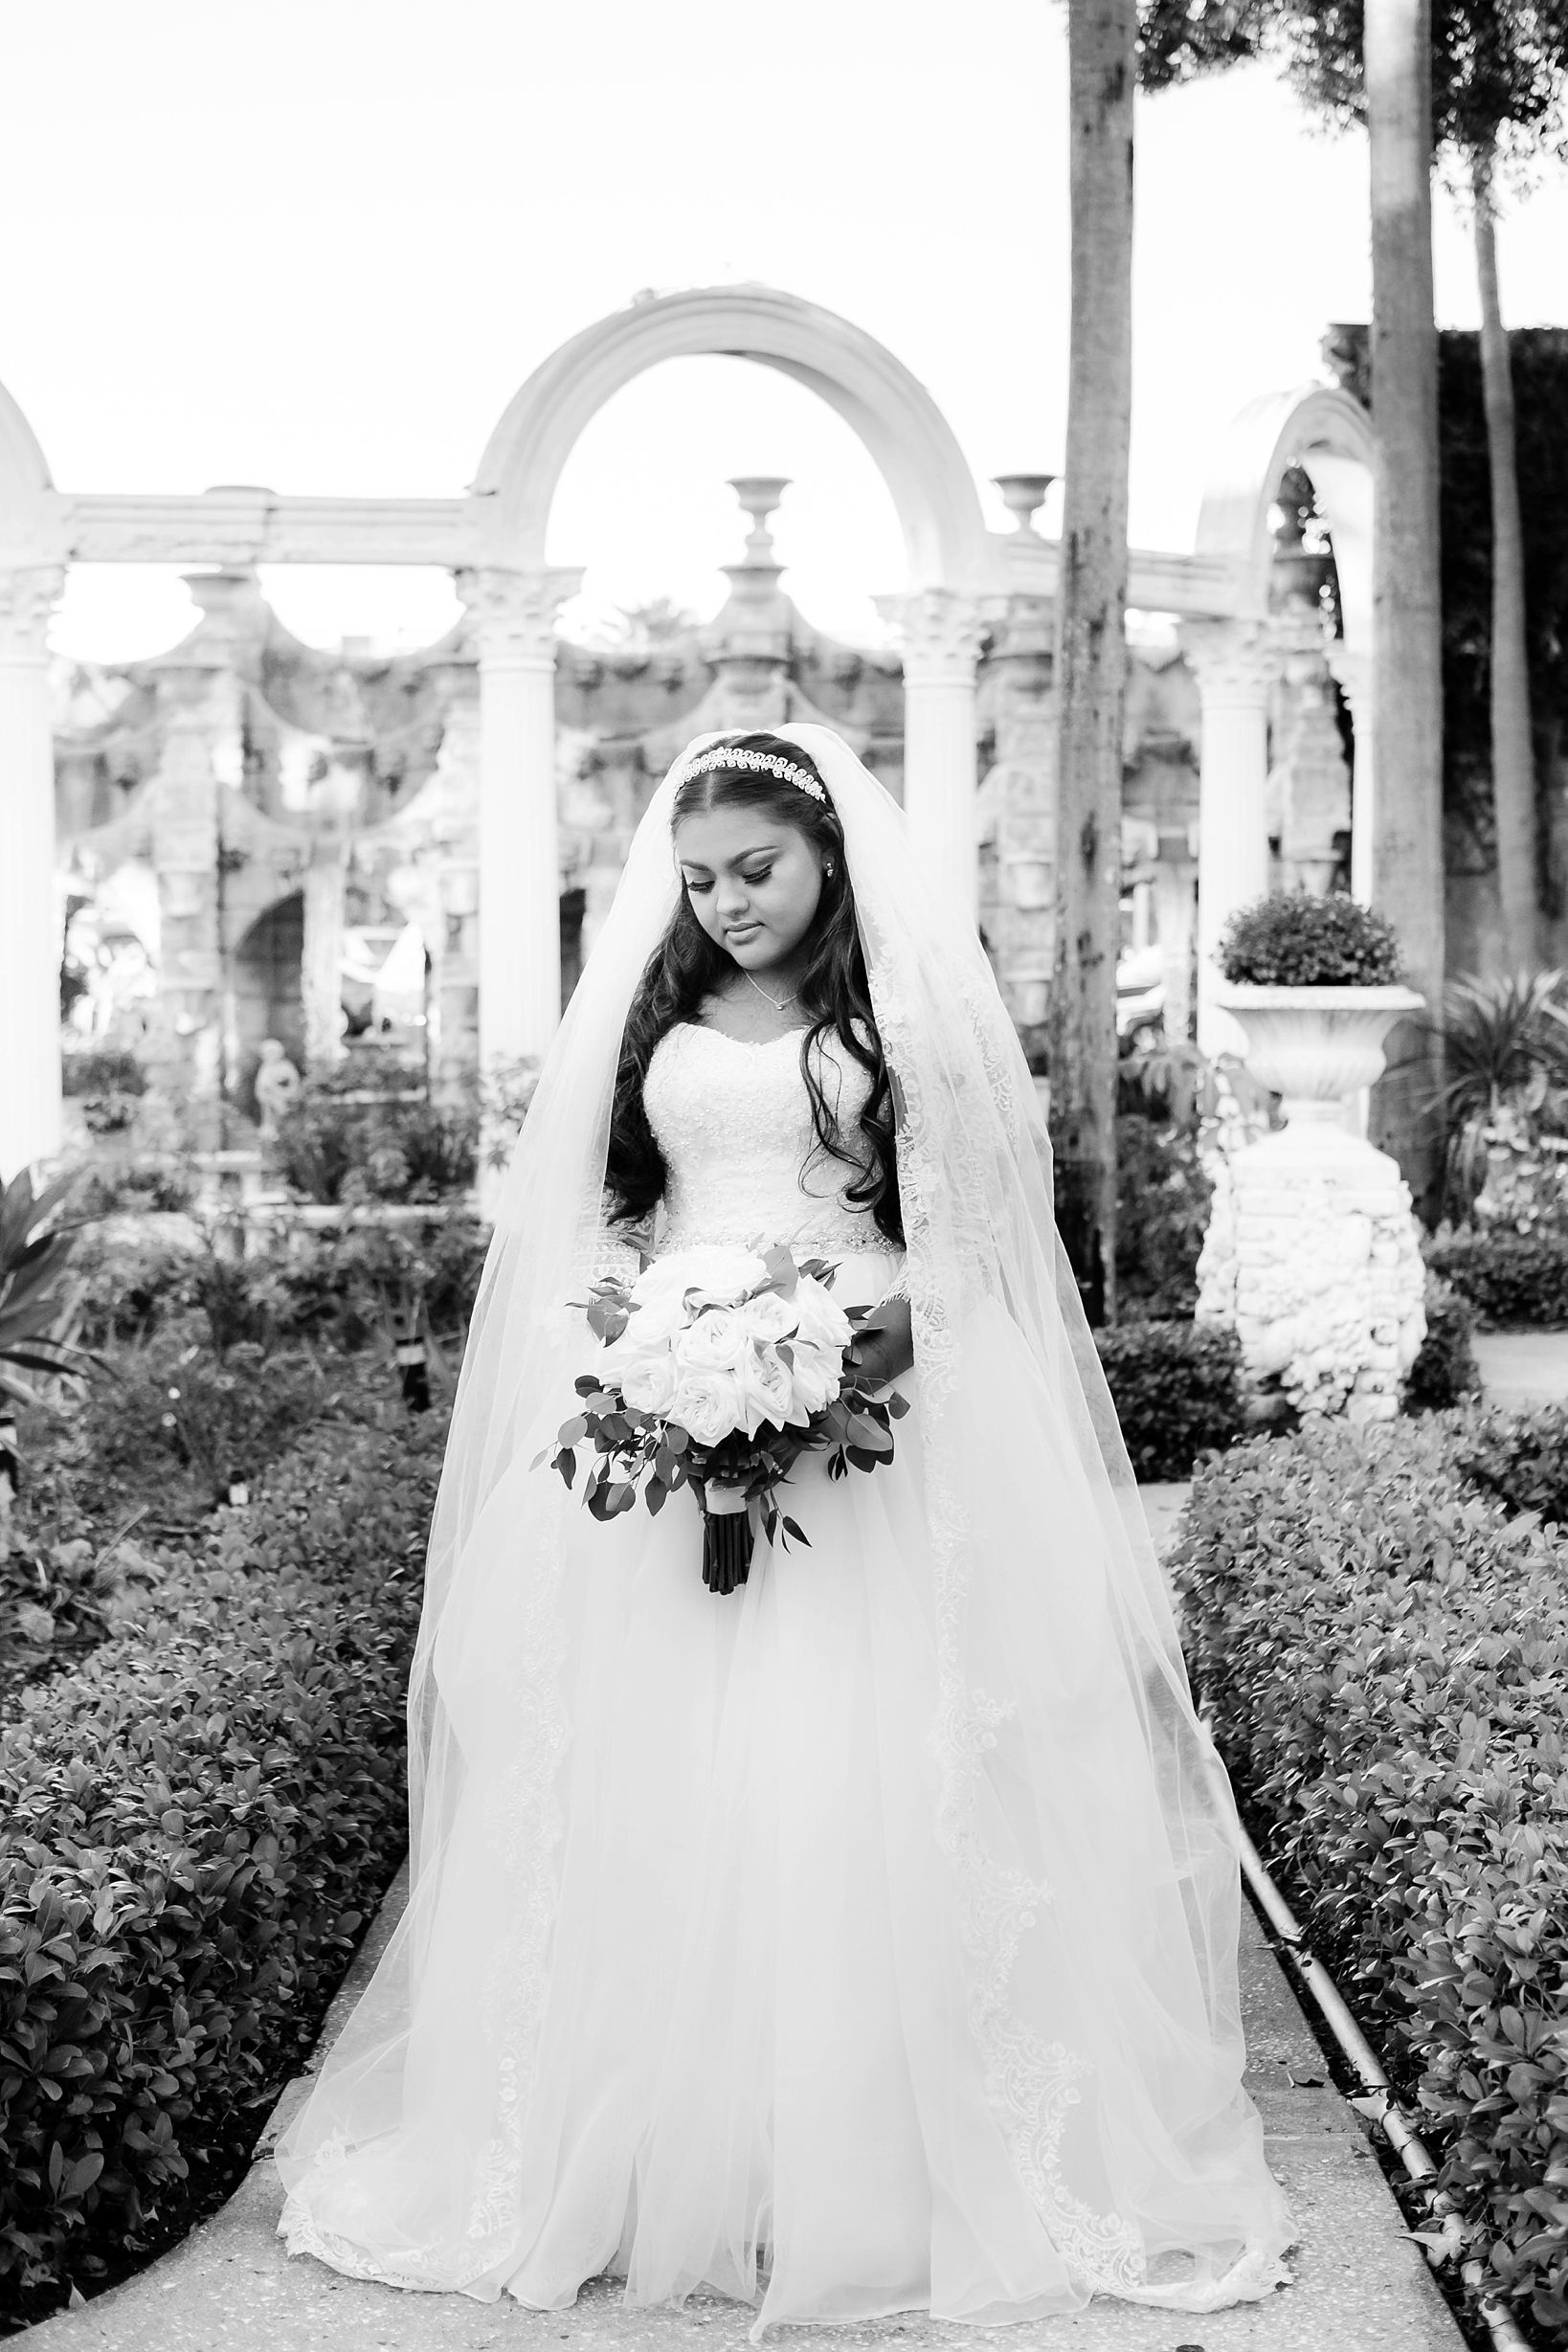 A timeless portrait of the bride in black and white at the Kapok Tree in Clearwater, FL. by sarahben.com